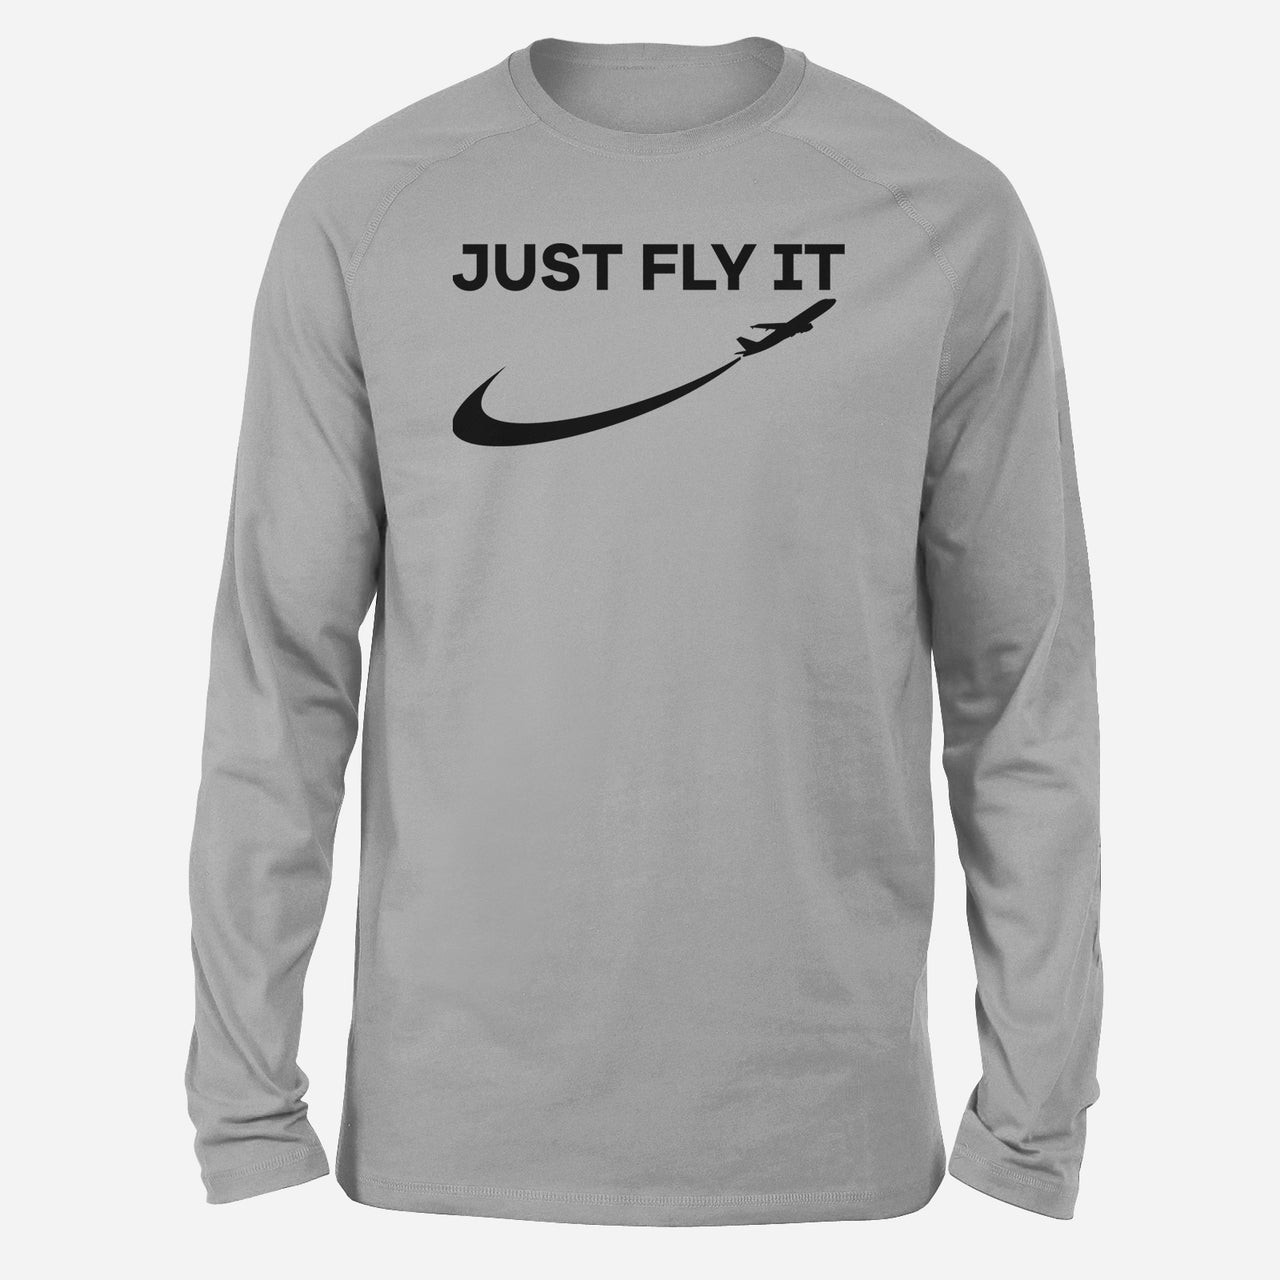 Just Fly It 2 Designed Long-Sleeve T-Shirts